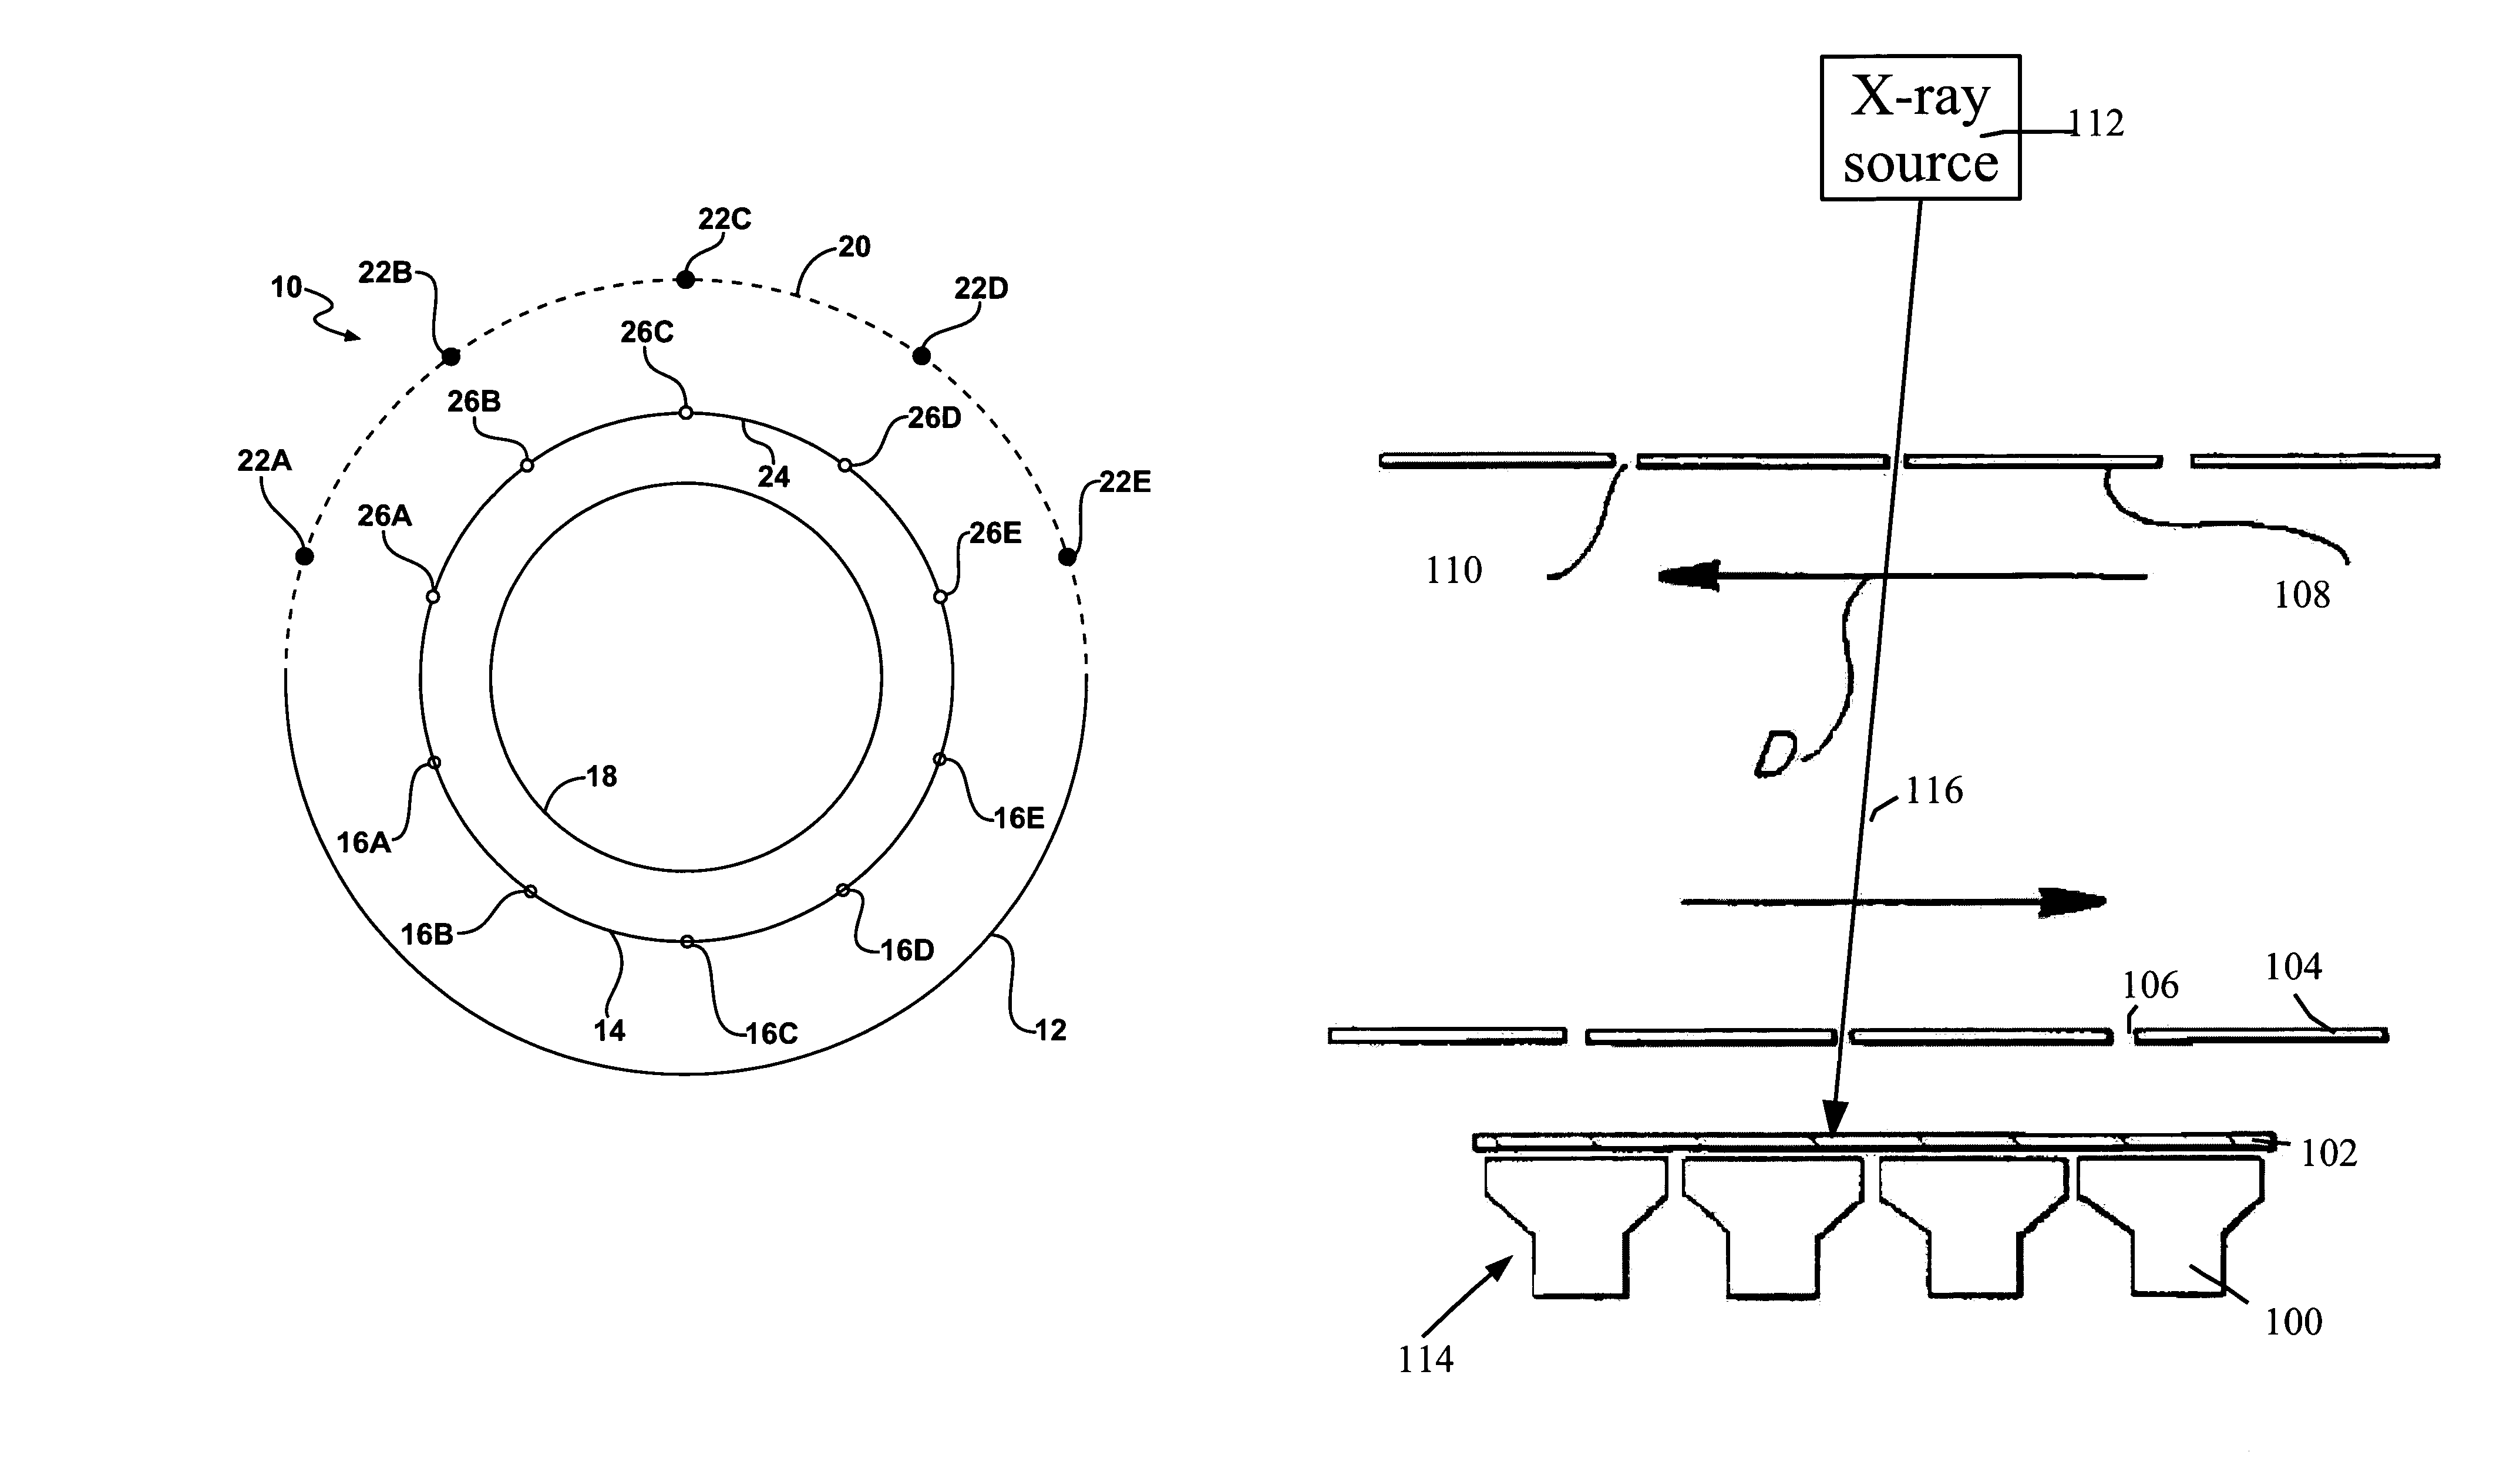 Nuclear medical imaging device